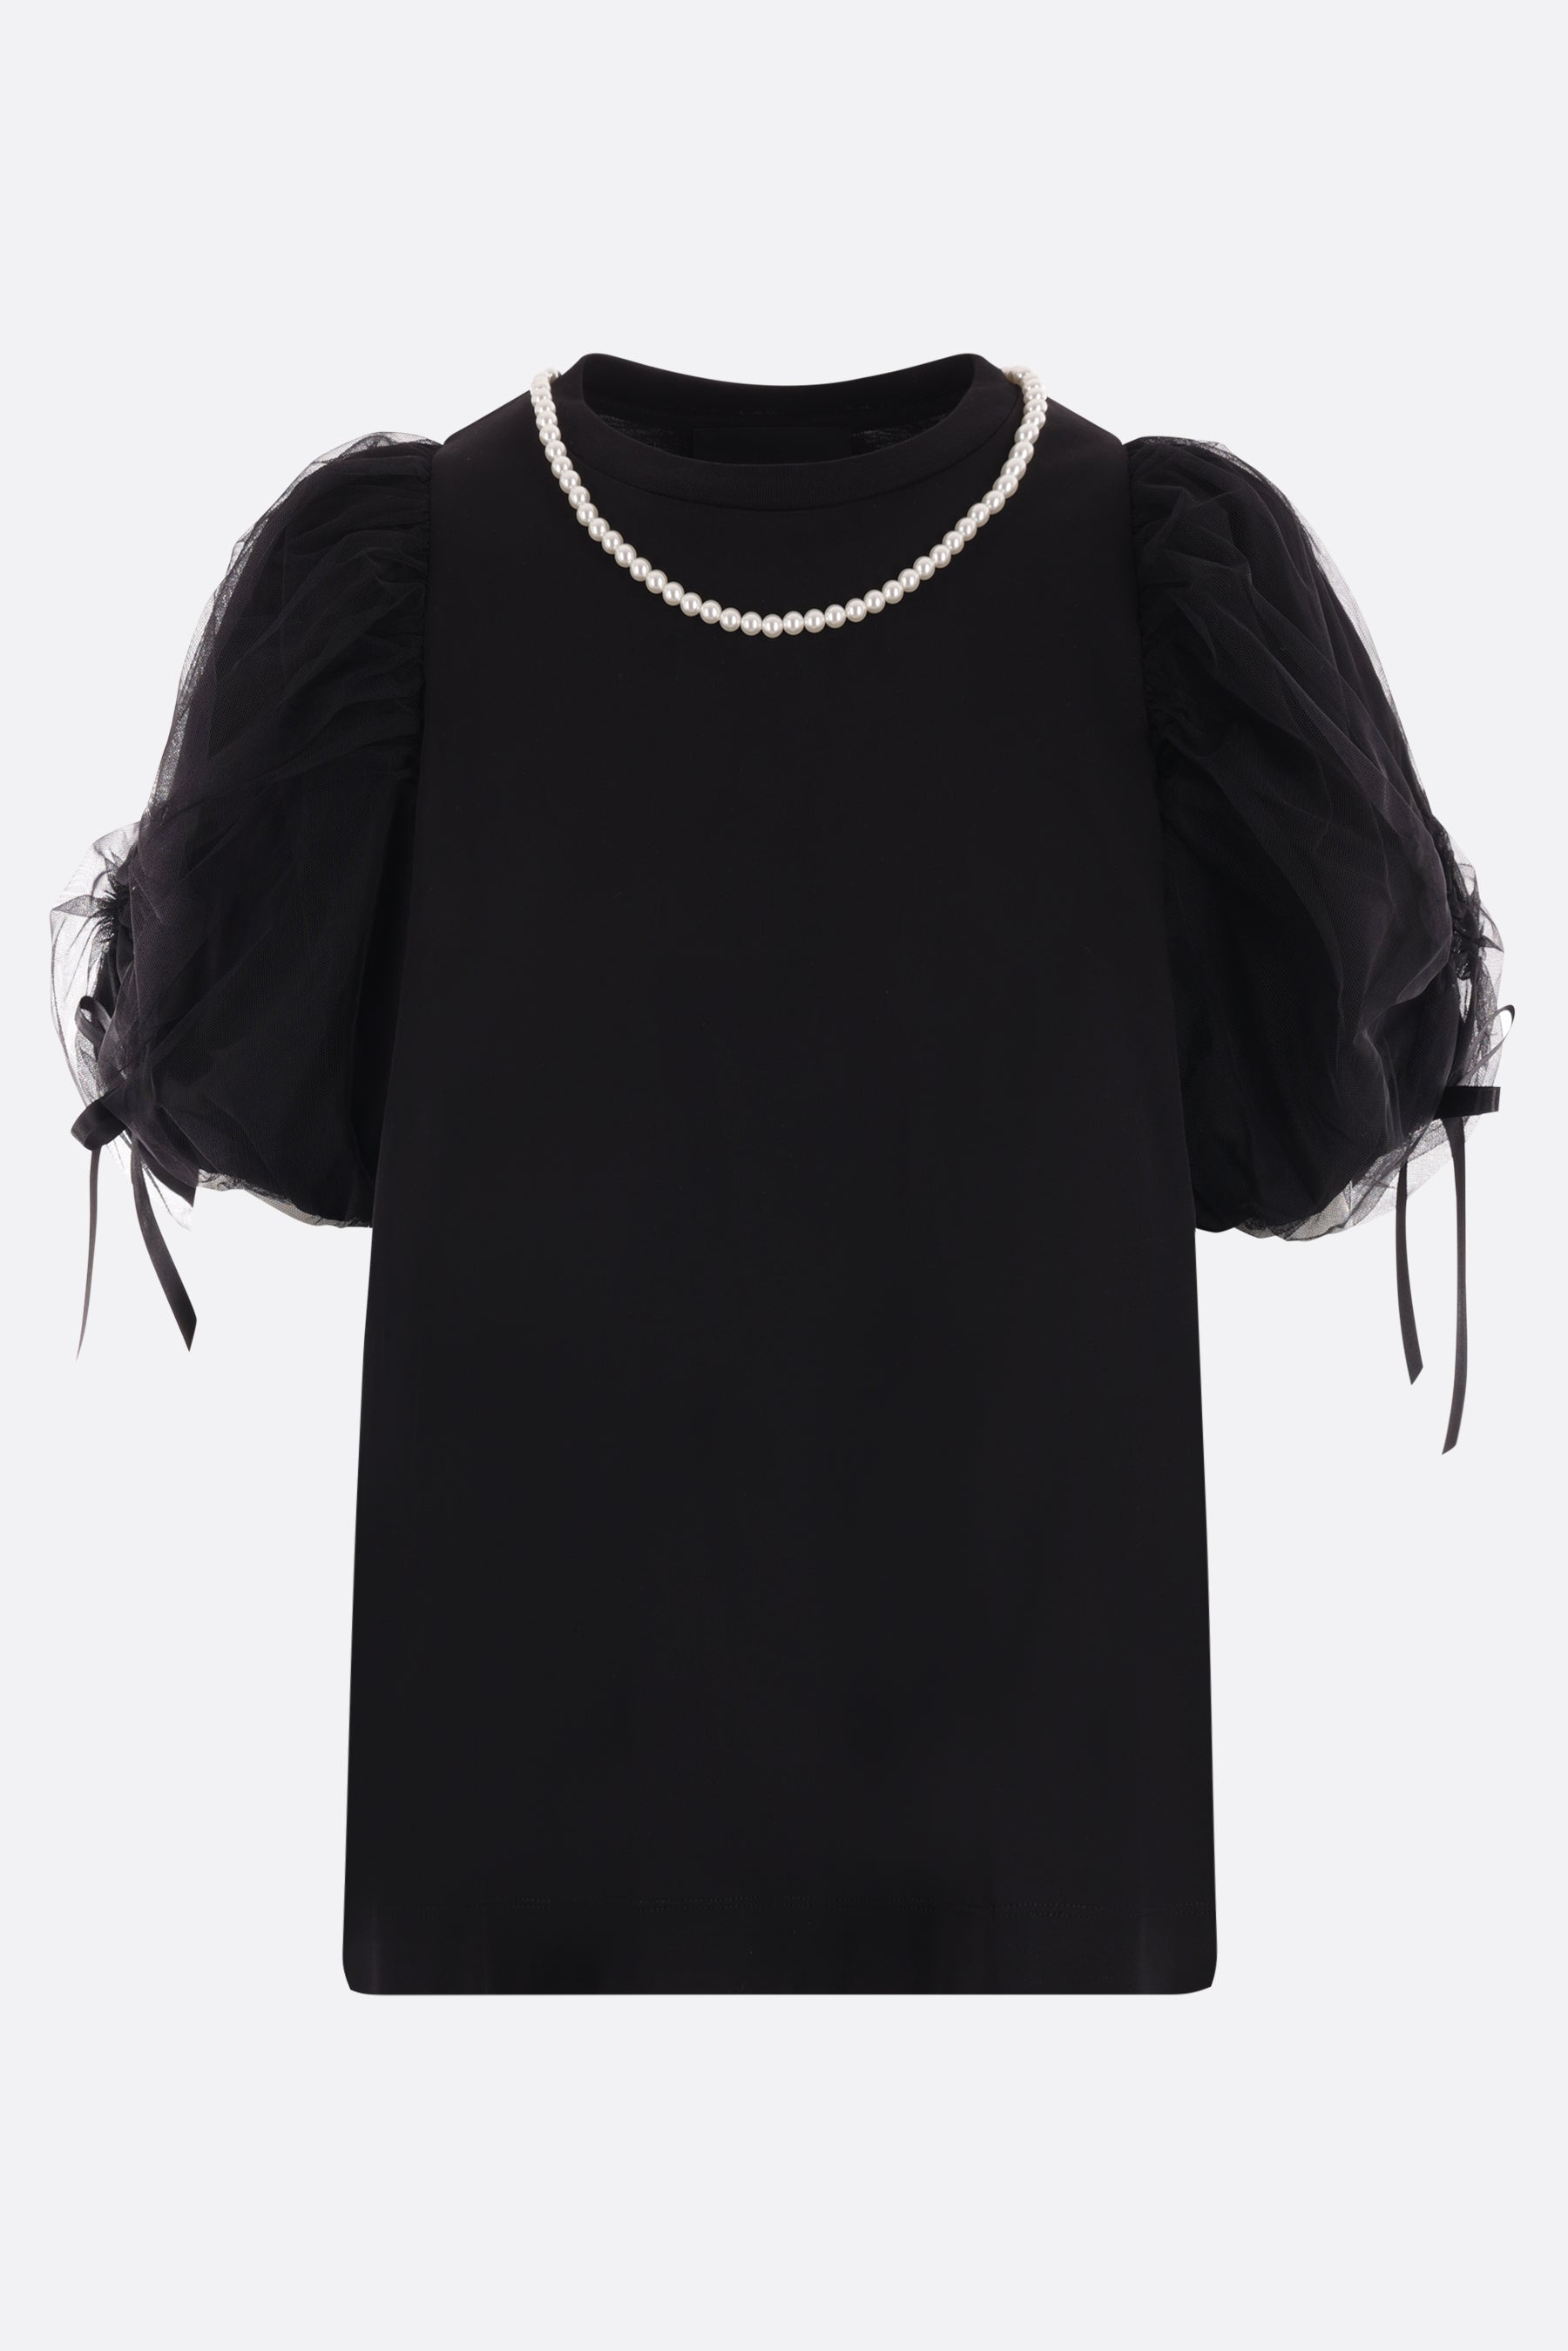 t-shirt in jersey con maniche in tulle